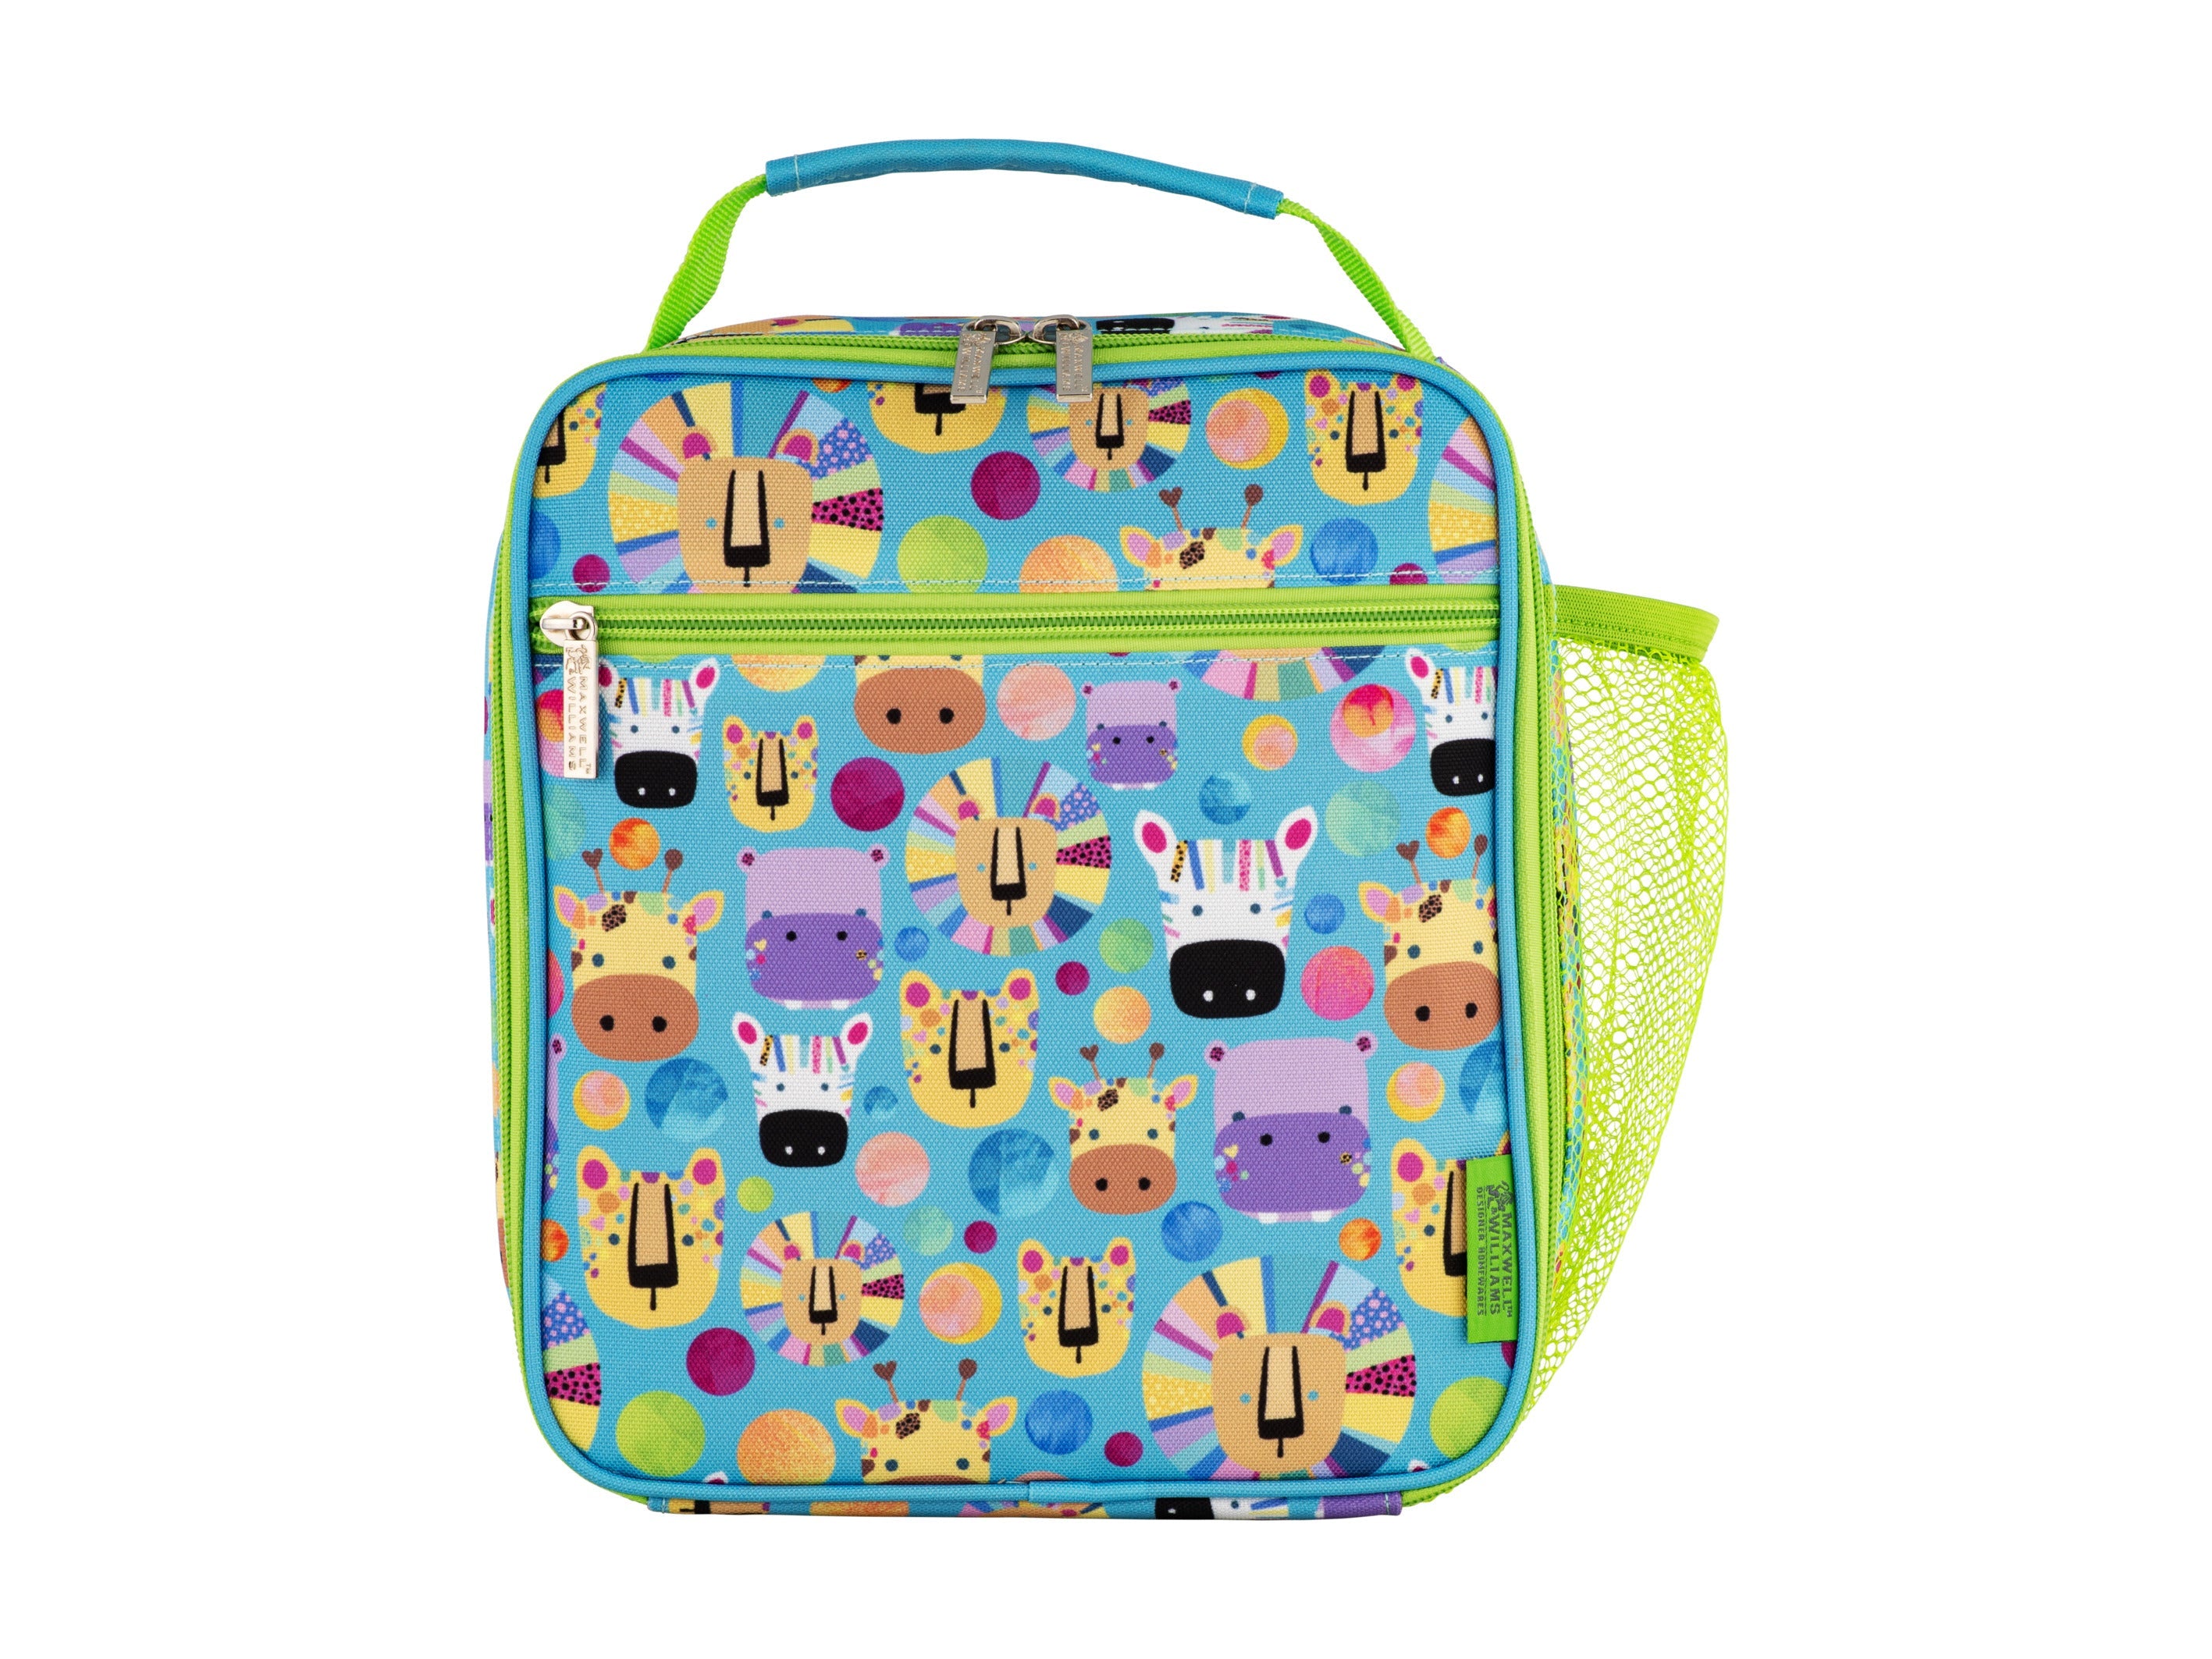 Maxwell & Williams Kasey Rainbow Critters Insulated Children's Lunch Bag - Blue